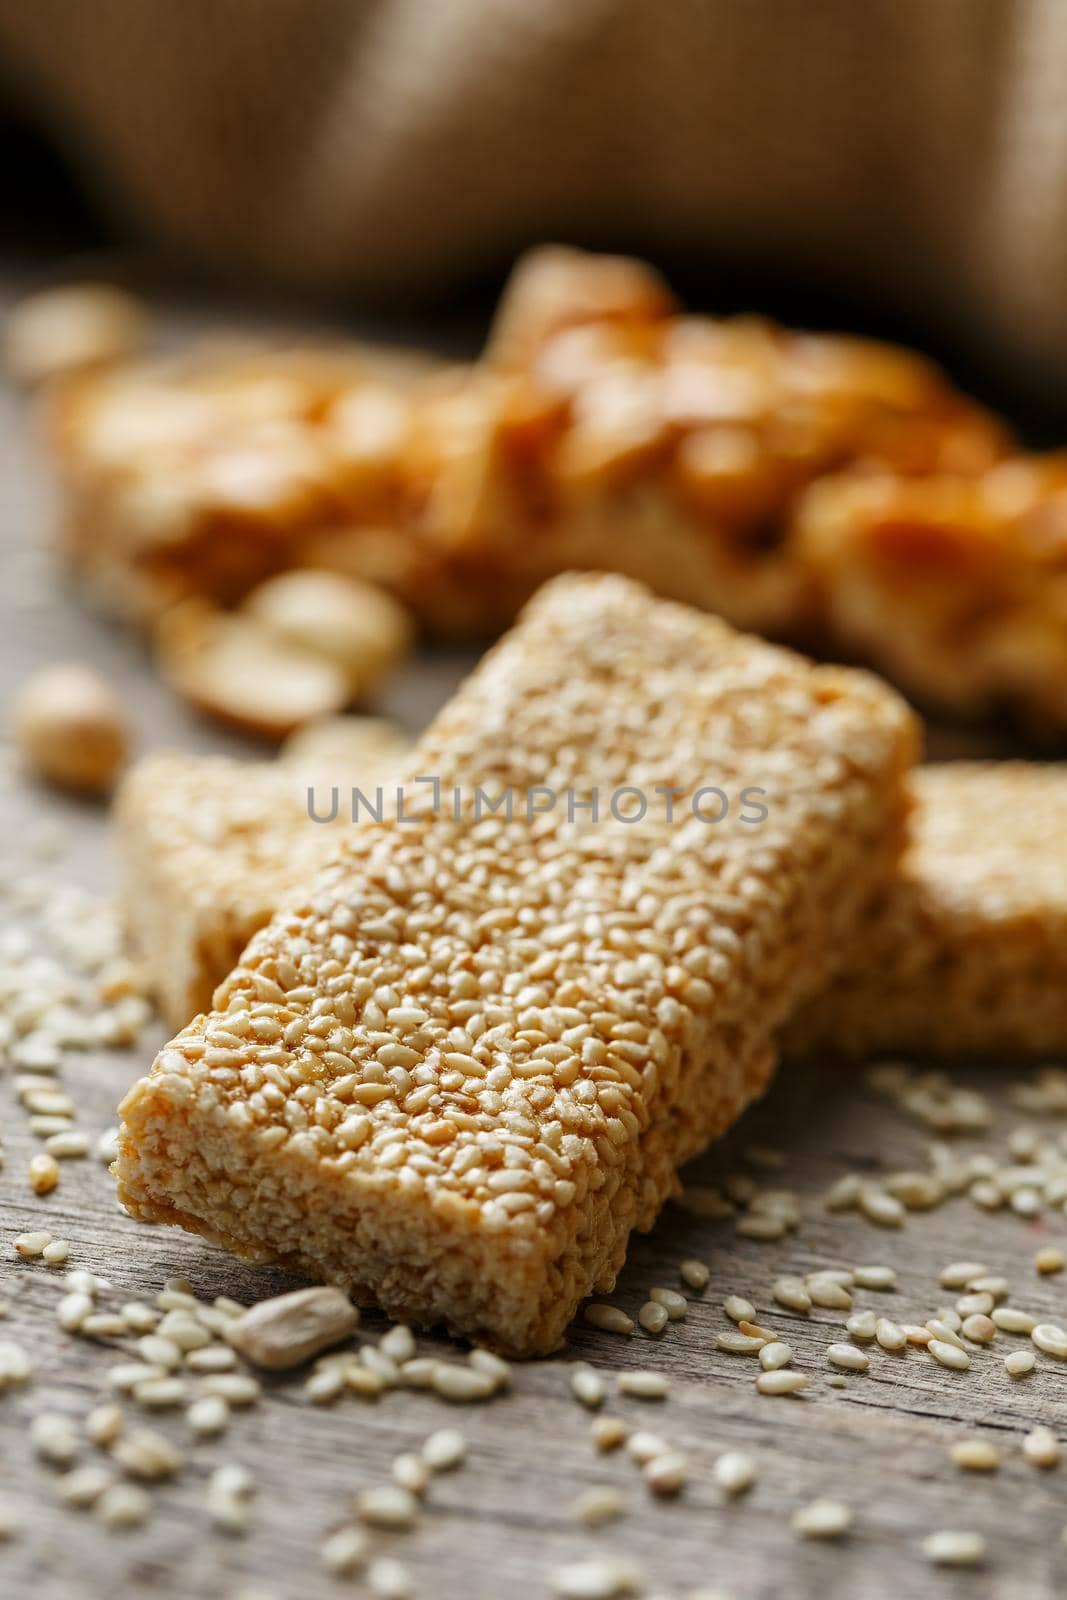 Sesame seed casinos on old vintage background with burlap cloth. Country style. Delicious sweets from seeds of sunflower, sesame and peanuts, covered with shiny glaze. Macro, macro, vertically